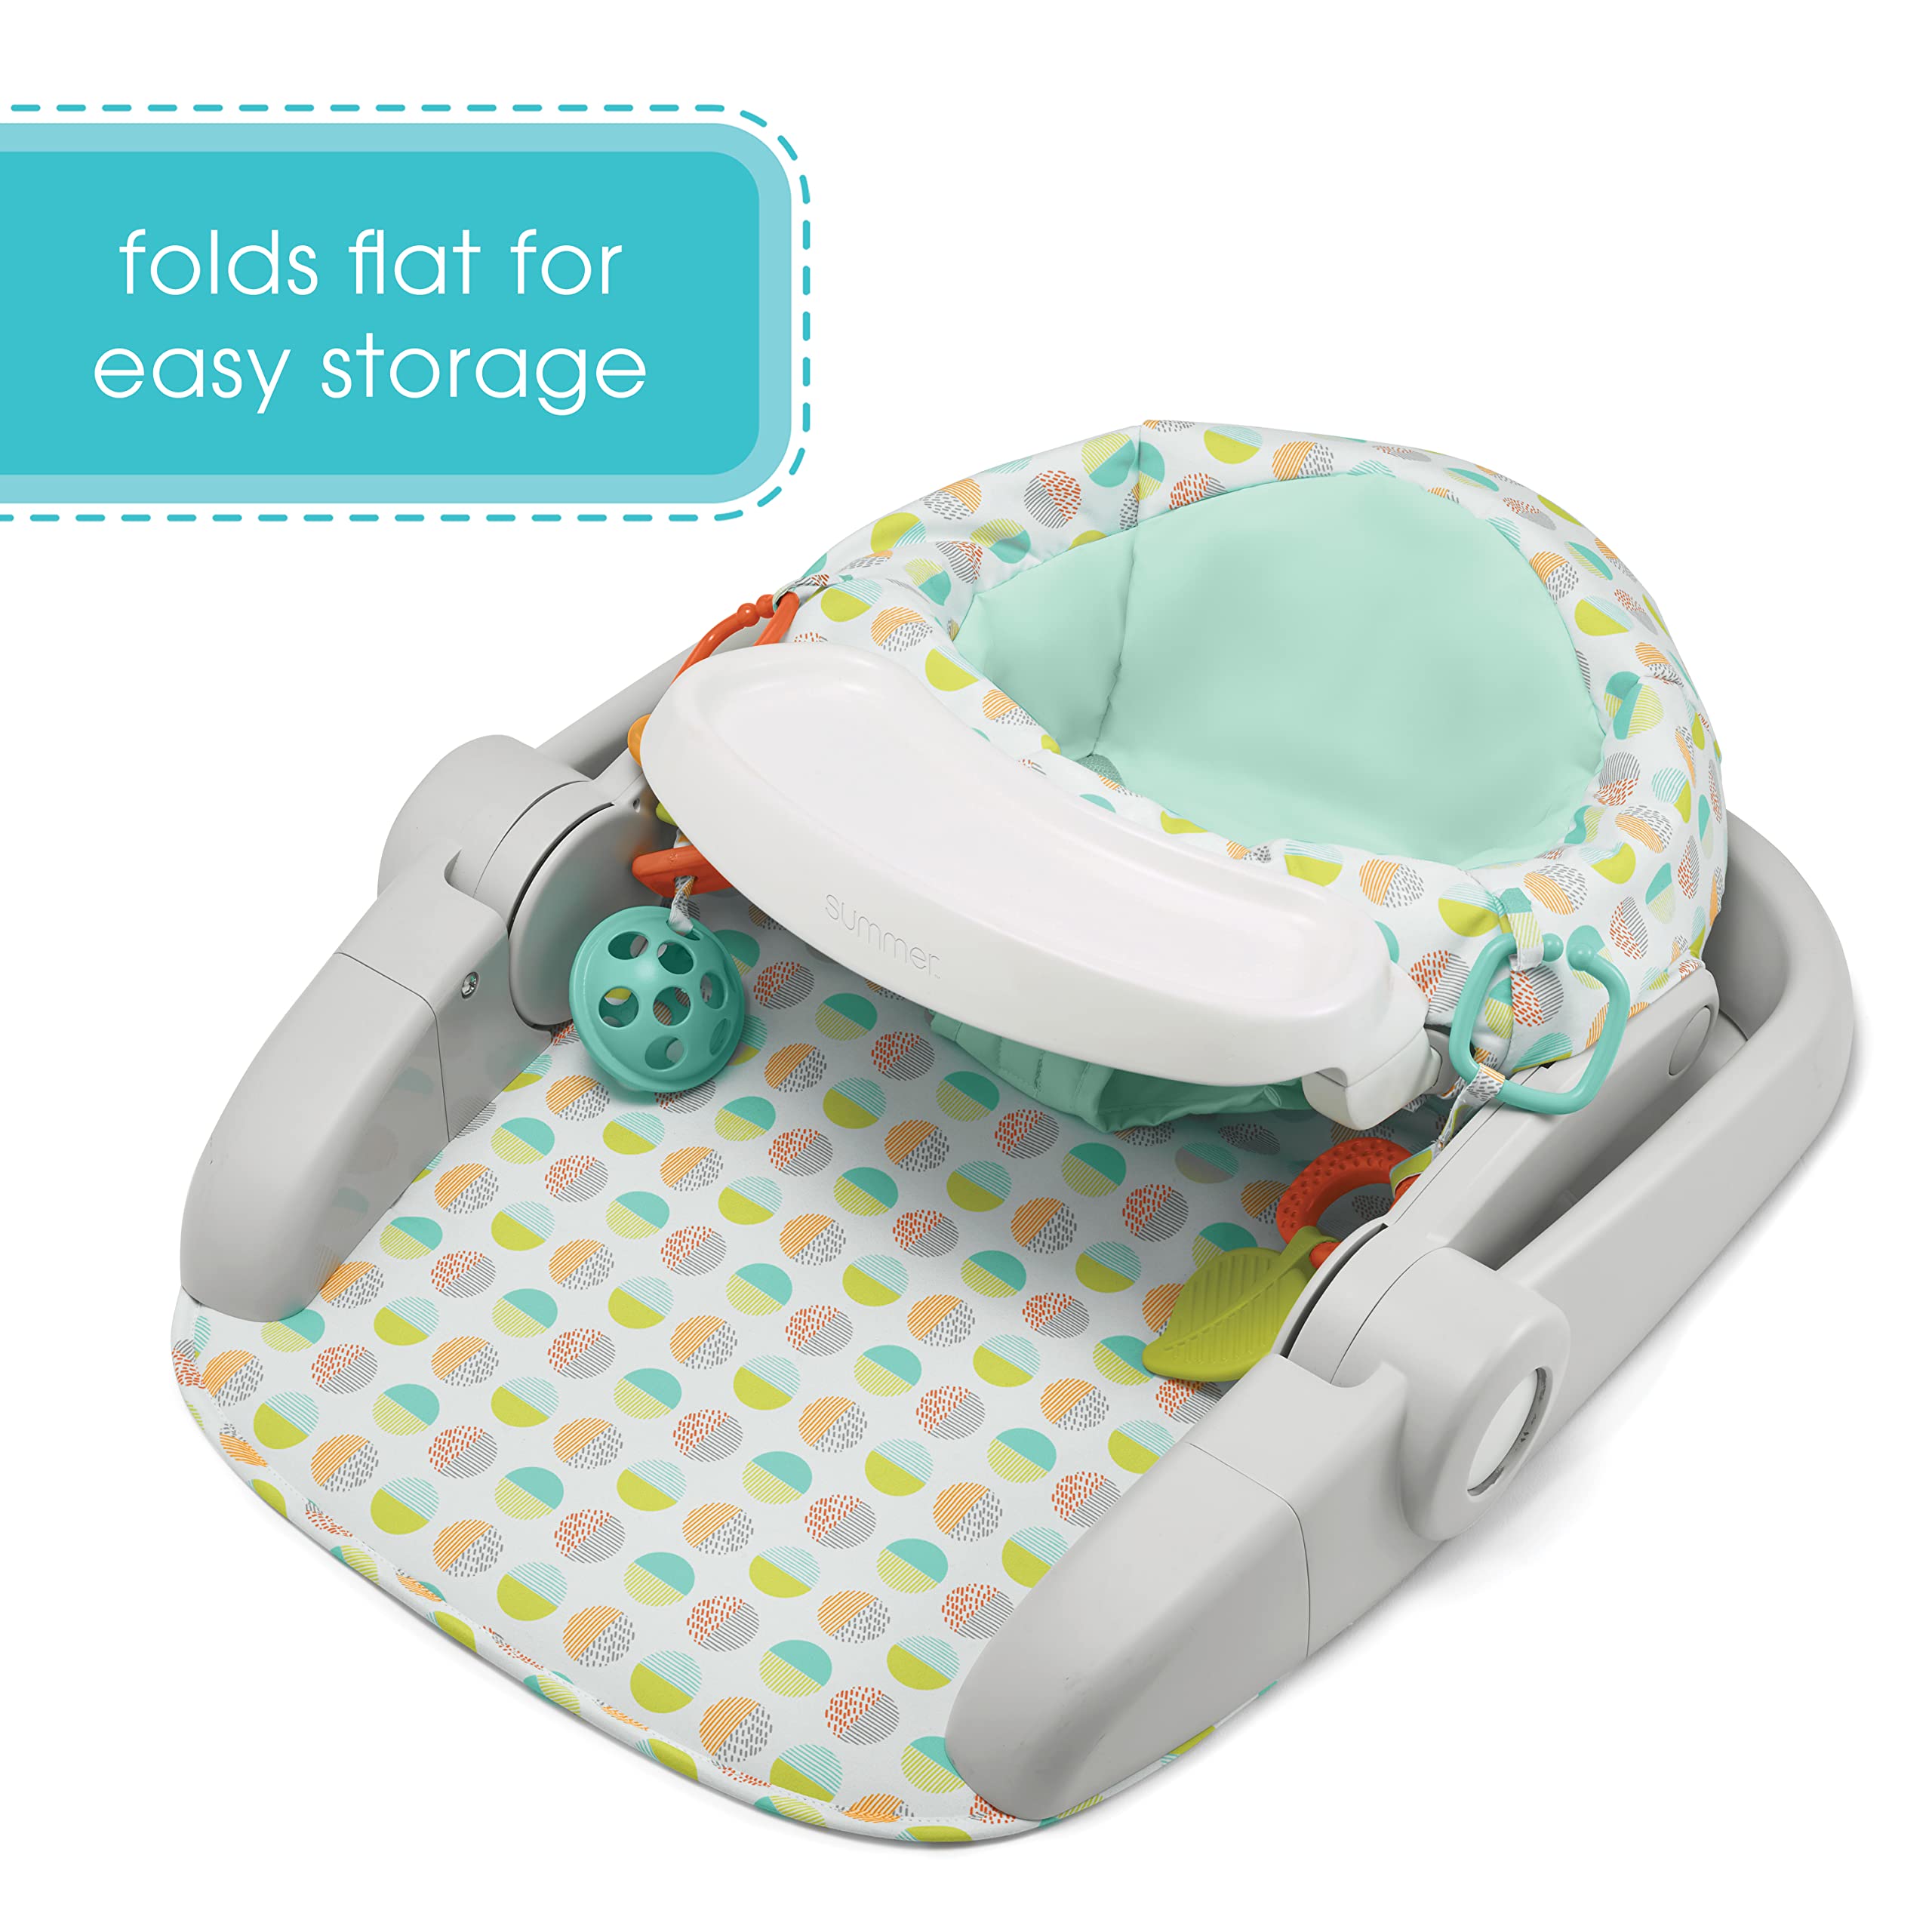 Summer Learn-to-Sit Stages 3-Position Floor Seat, Sweet-and-Sour Neutral – Sit Baby Up to See The World – Baby Activity Seat is Adjustable for Ages 6-12 Months – Includes Toys and Tray